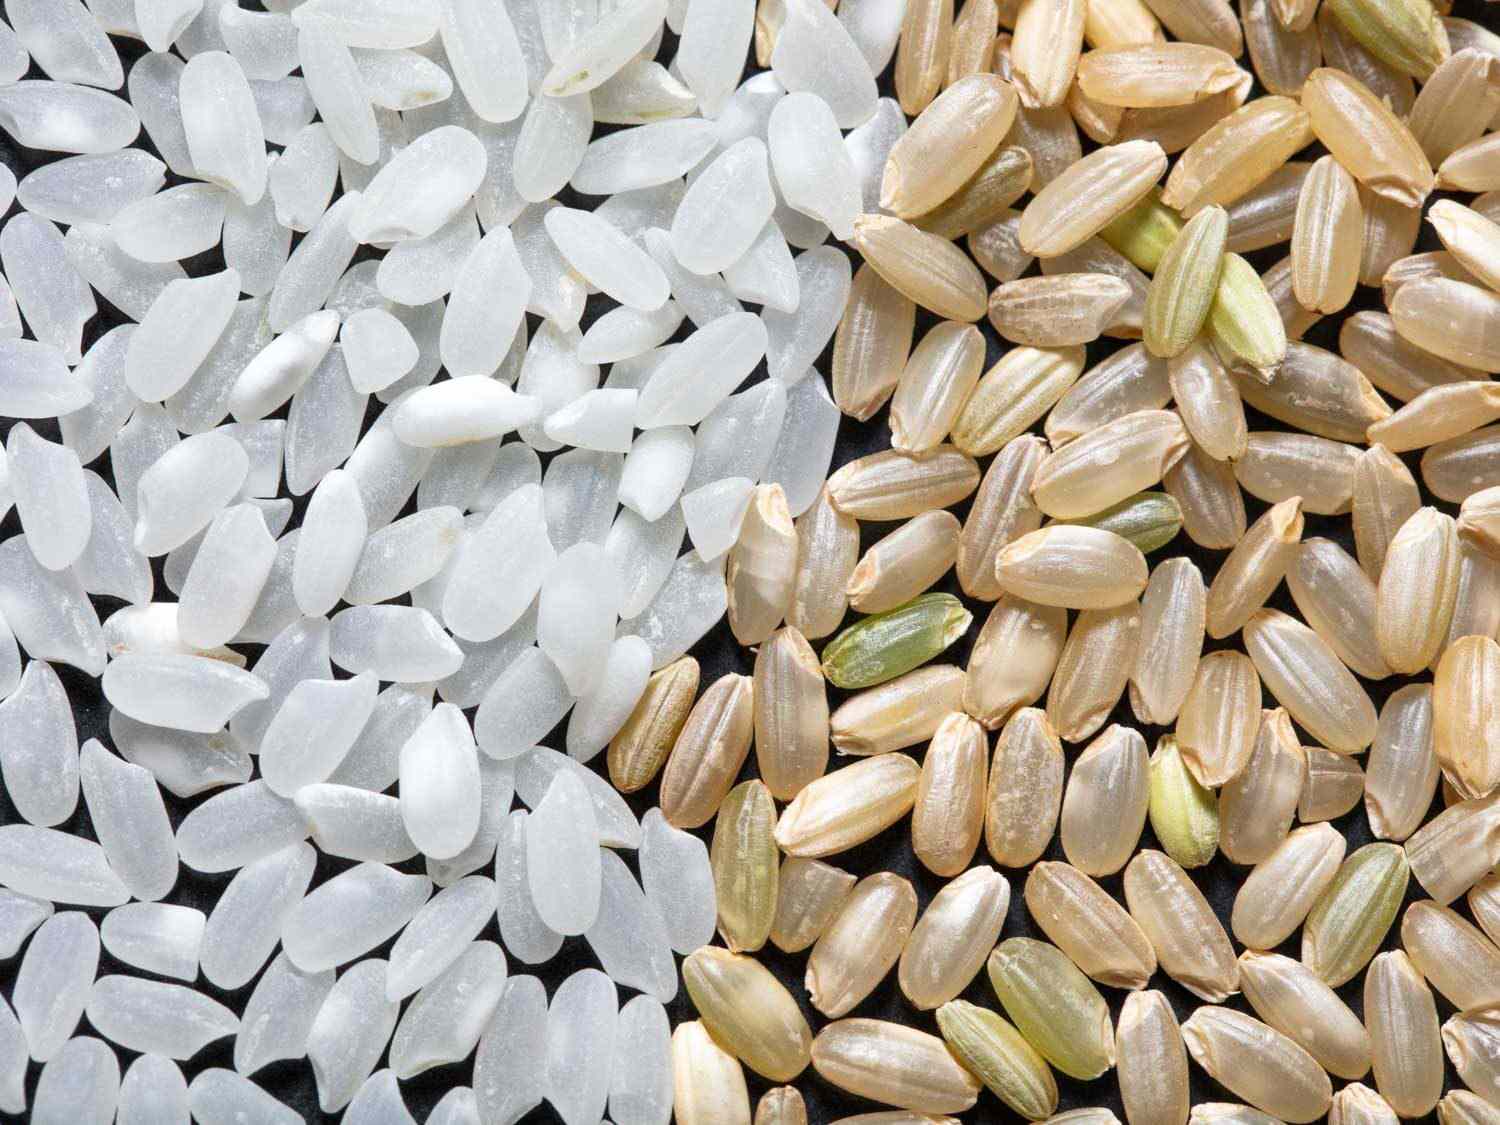 A macro view of short- to medium-grained white and brown rice